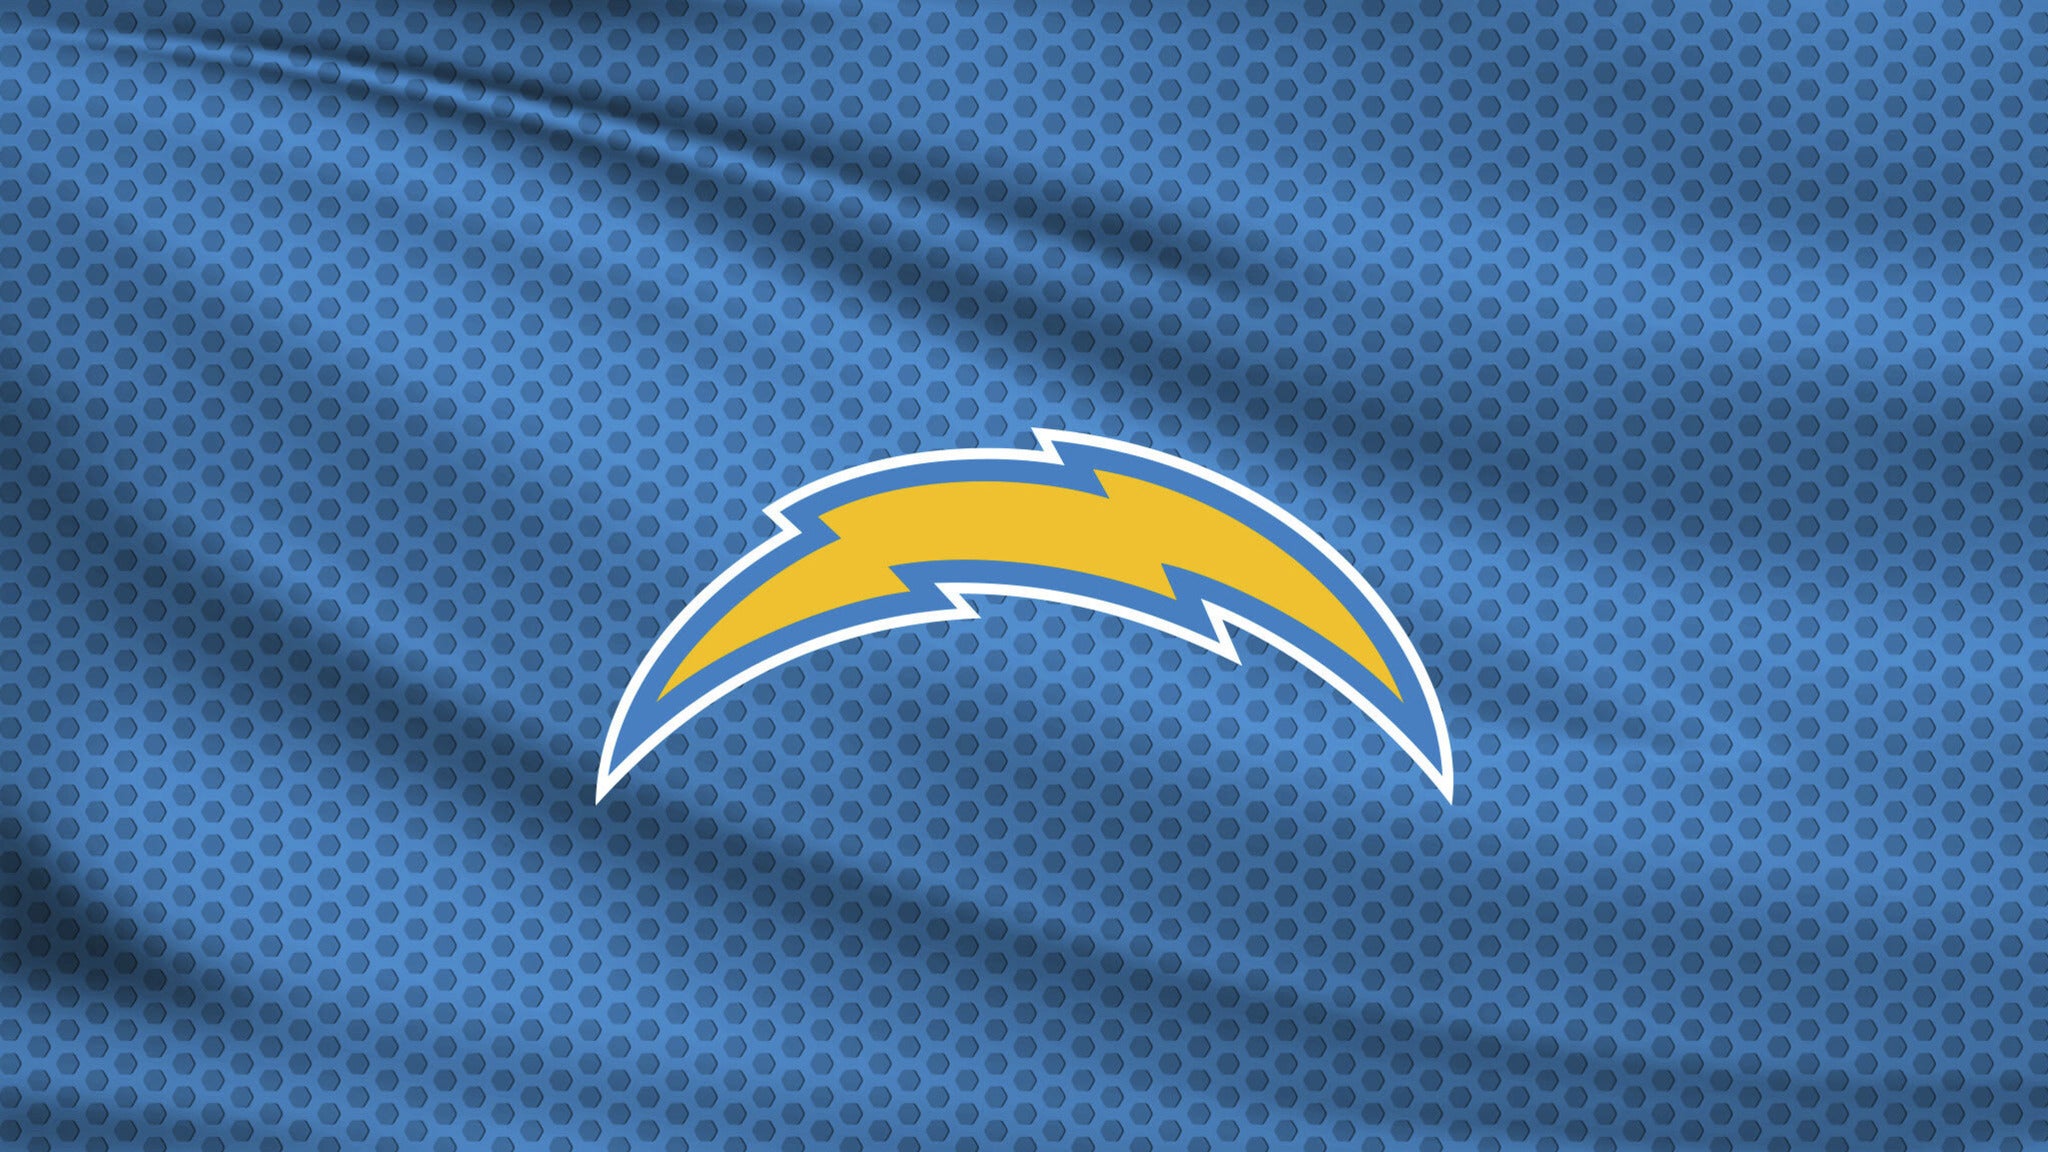 chargers preseason tickets